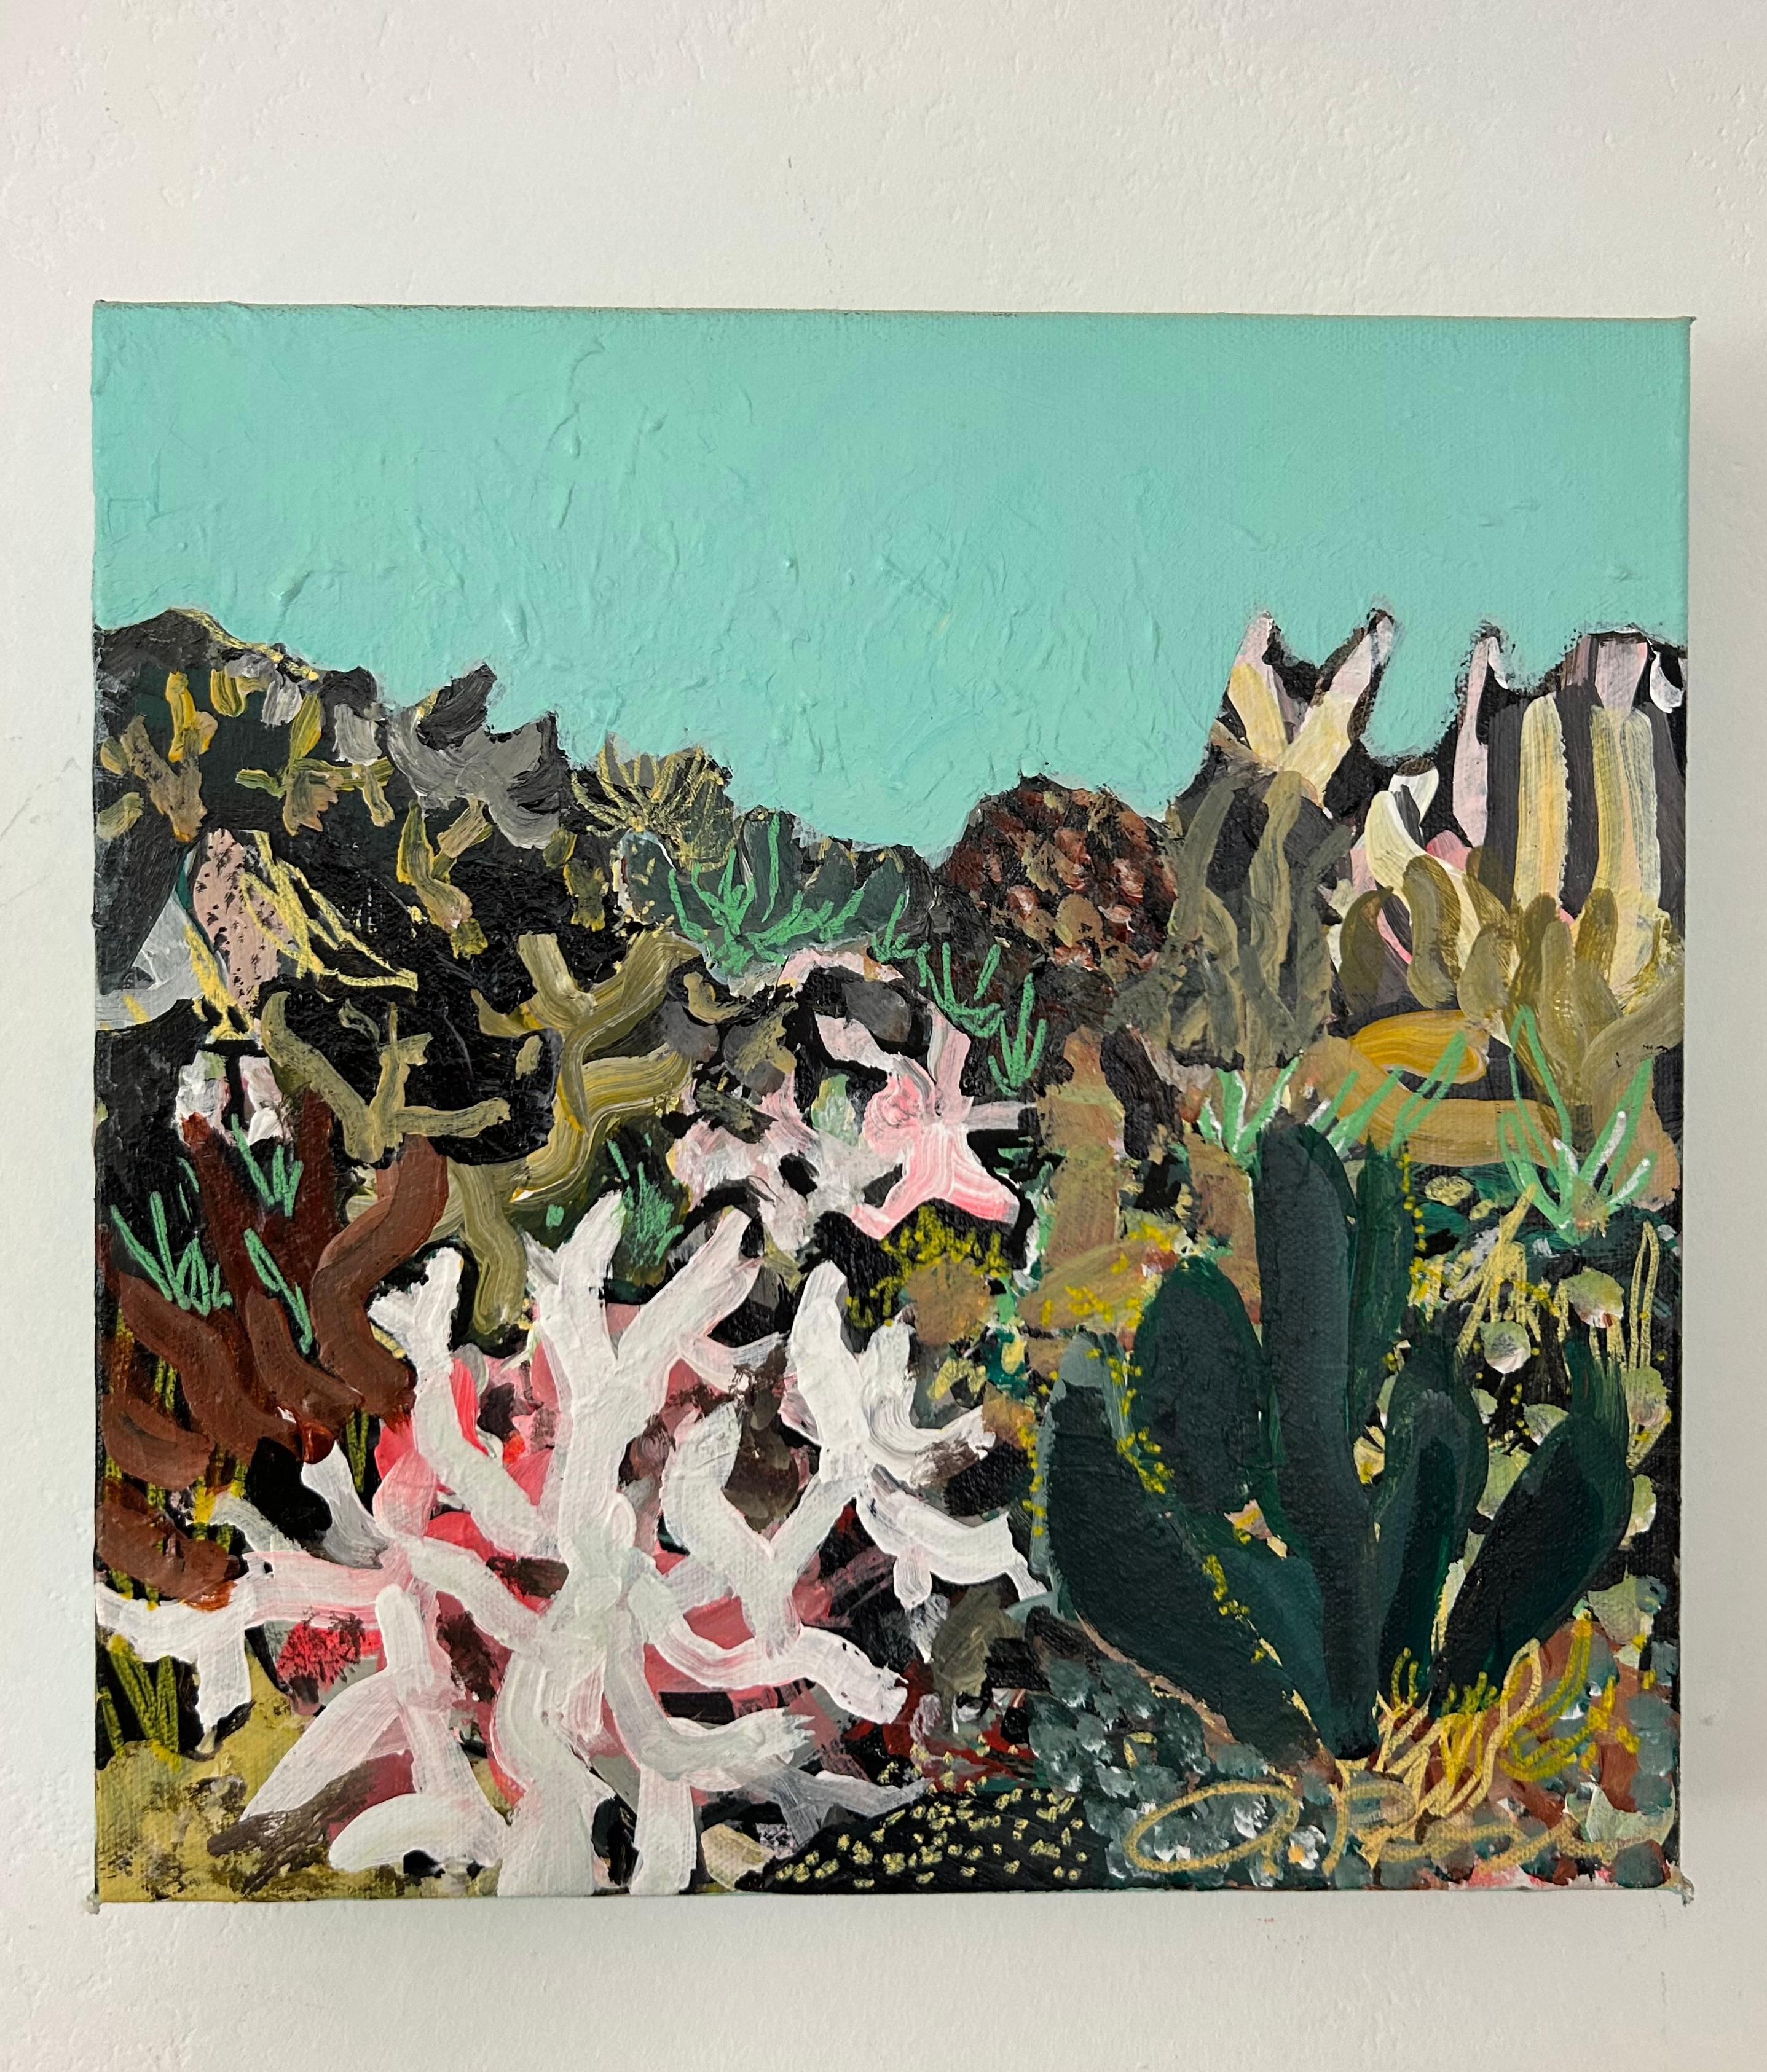 <p>Artist Comments<br />Inspired by her deep fondness for ocean botanicals, artist Autumn Rose paints a spirited underwater garden of corals, kelp, and anemones. 